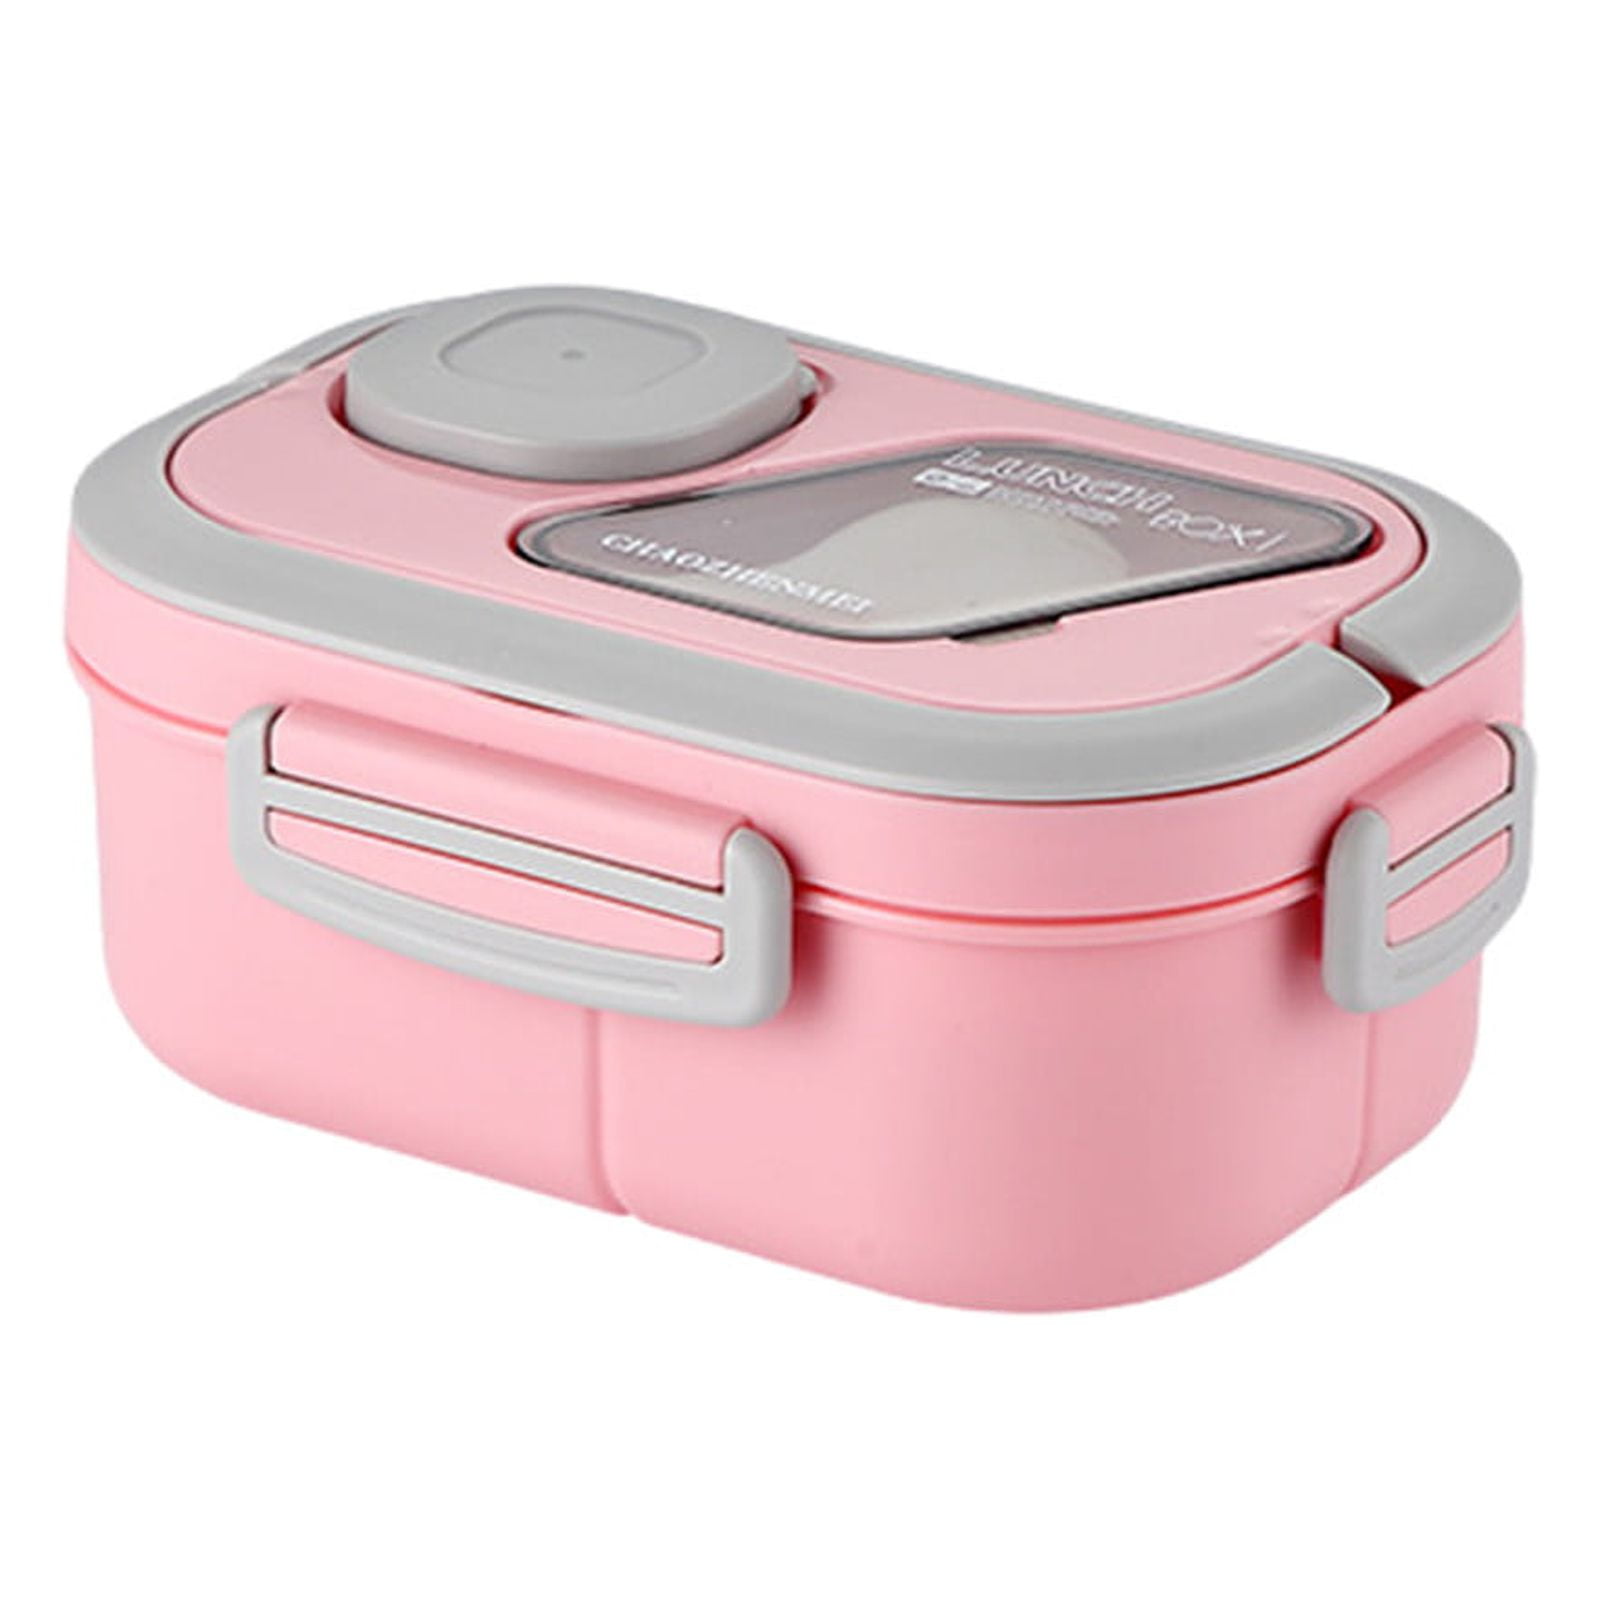  TIME4DEALS Stainless Steel Bento Lunch Box, Pink,  5-Compartment, Leak-Proof, 1000ML/34OZ, Ideal for Kids and Adults,  BPA-Free: Home & Kitchen